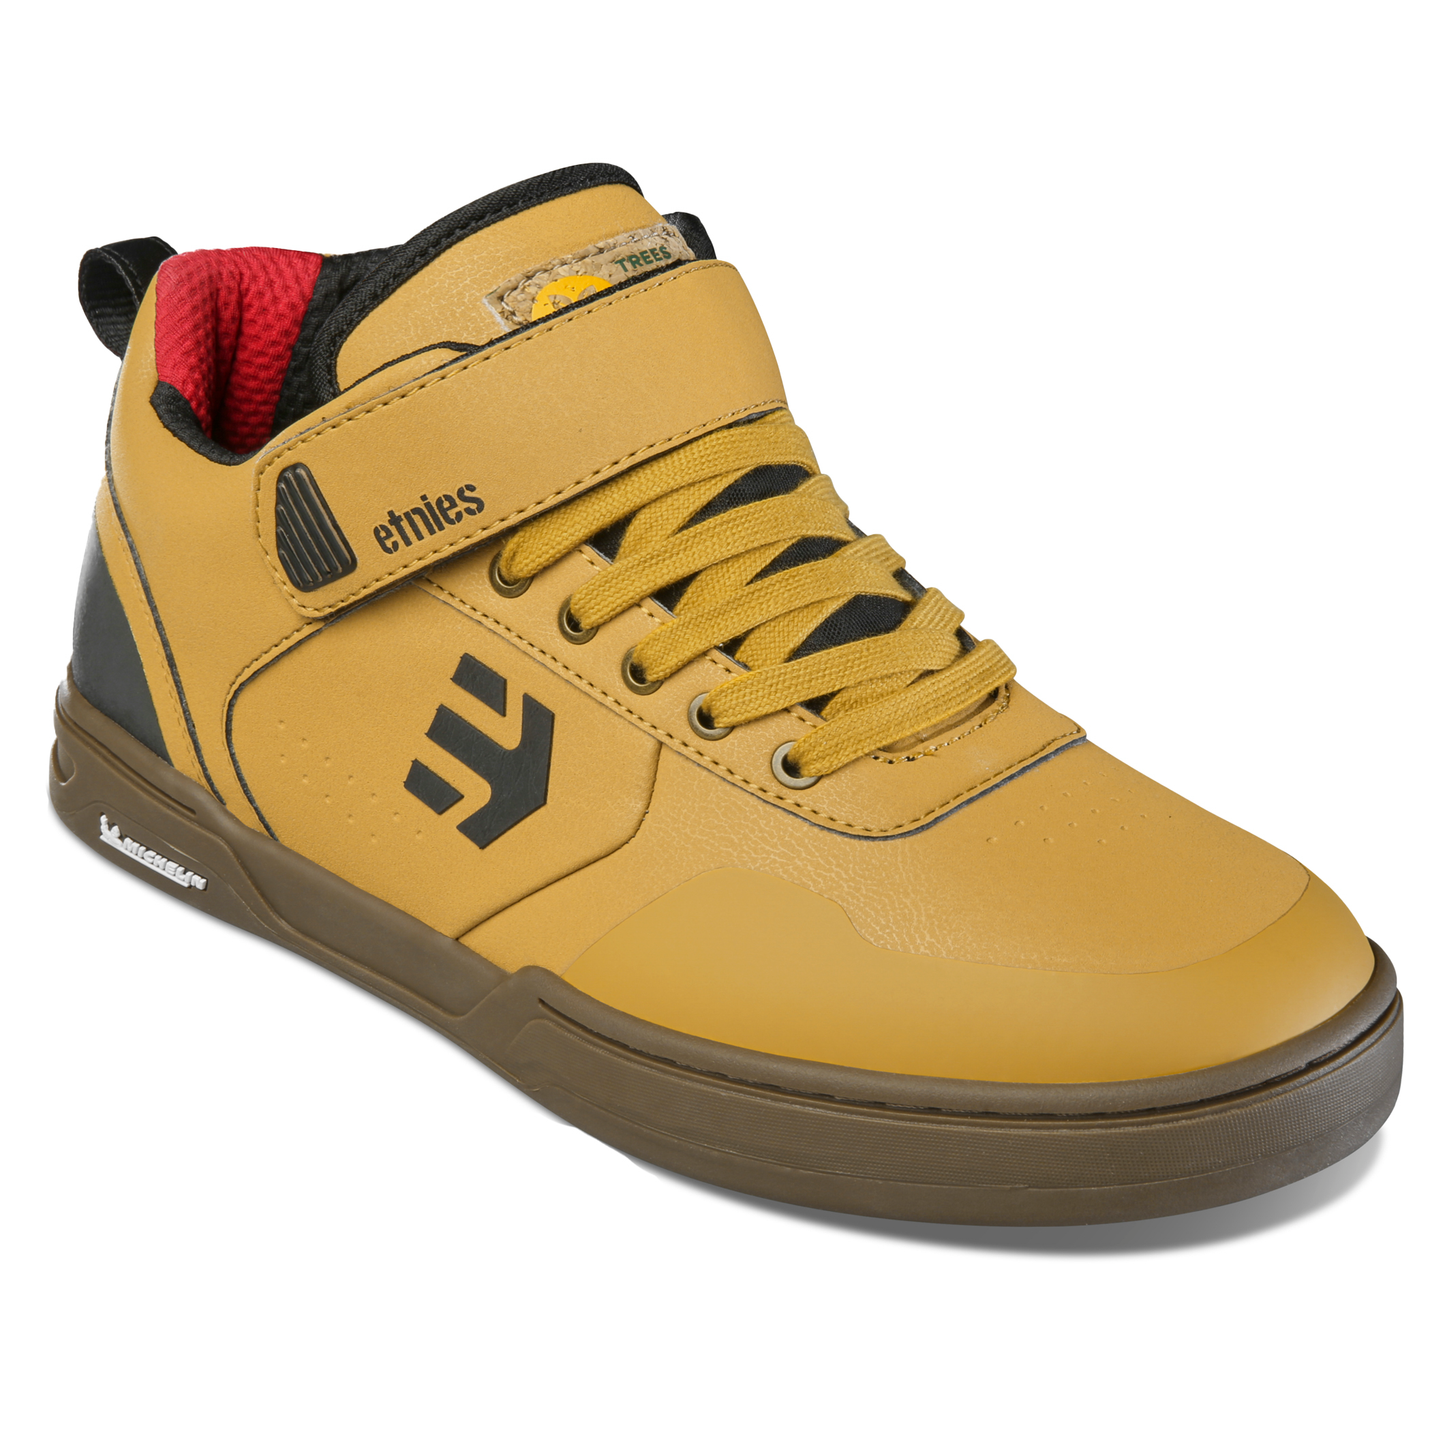 Etnies Camber Mid Michelin x TFTF Flat Shoes - US 9.0 - Tan - Gum - Image 2